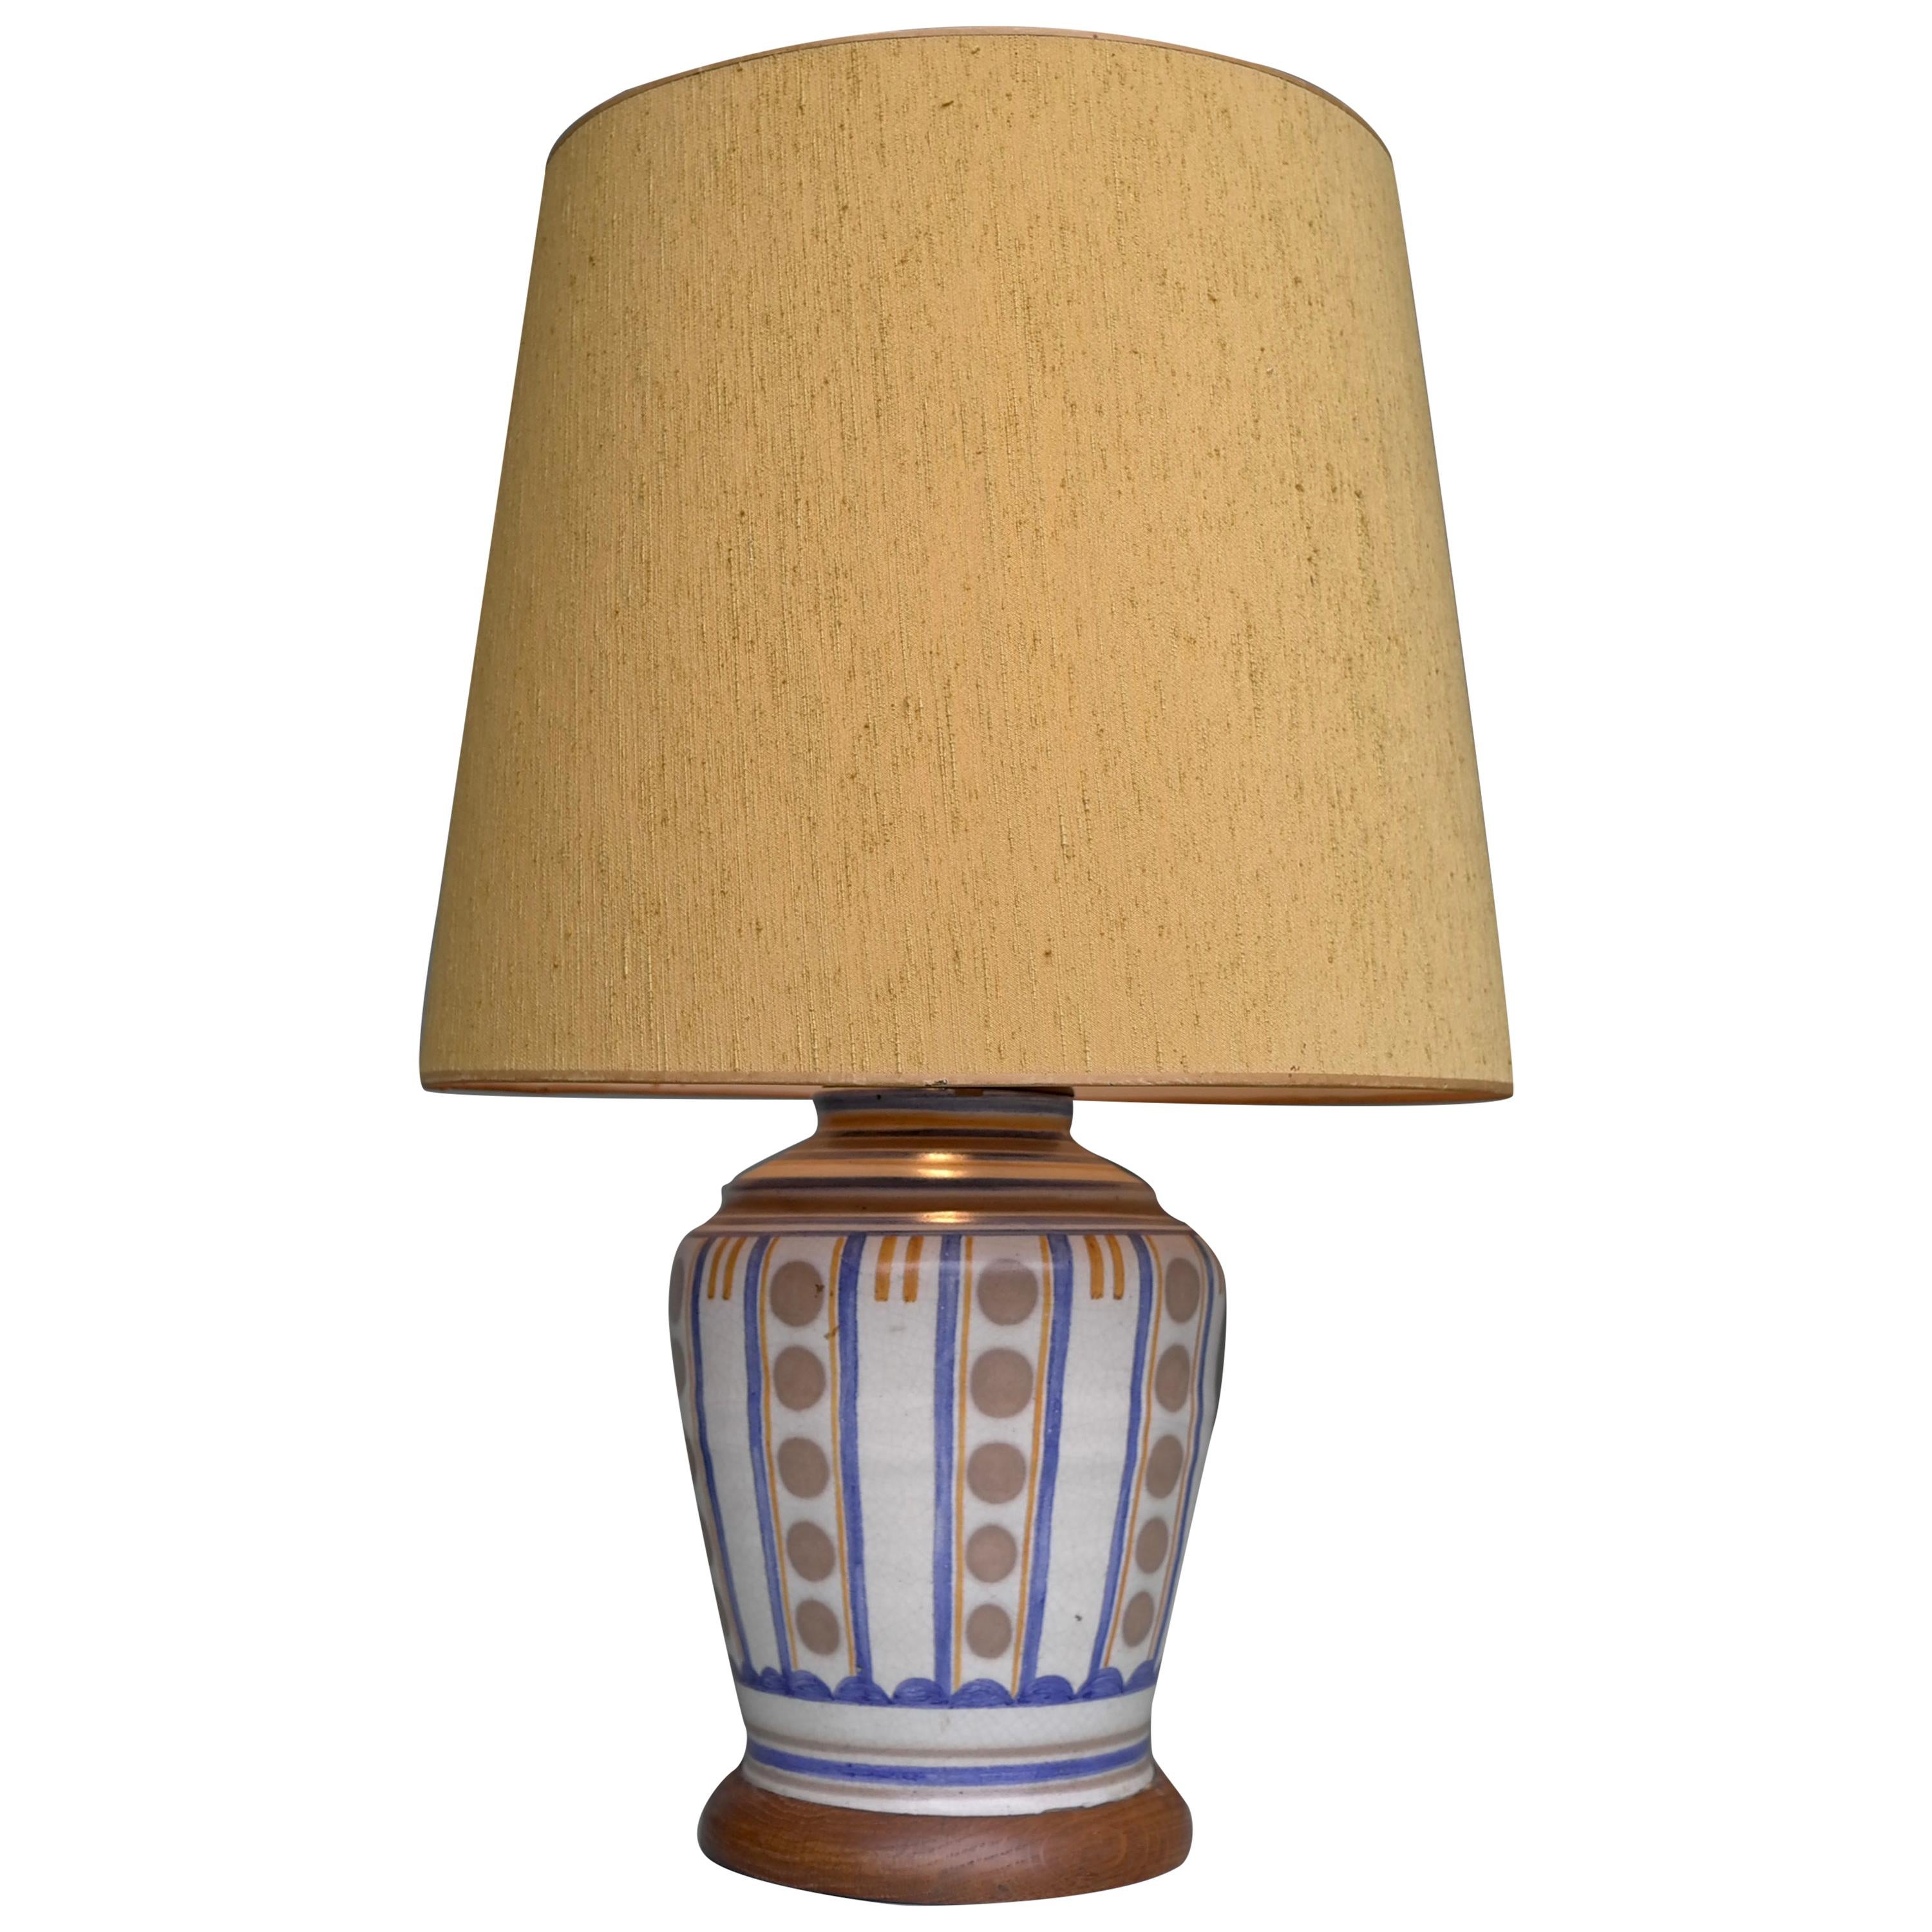 Art Deco French Ceramic and Wood Table Lamp with Silk Lampshade, France, 1940s For Sale